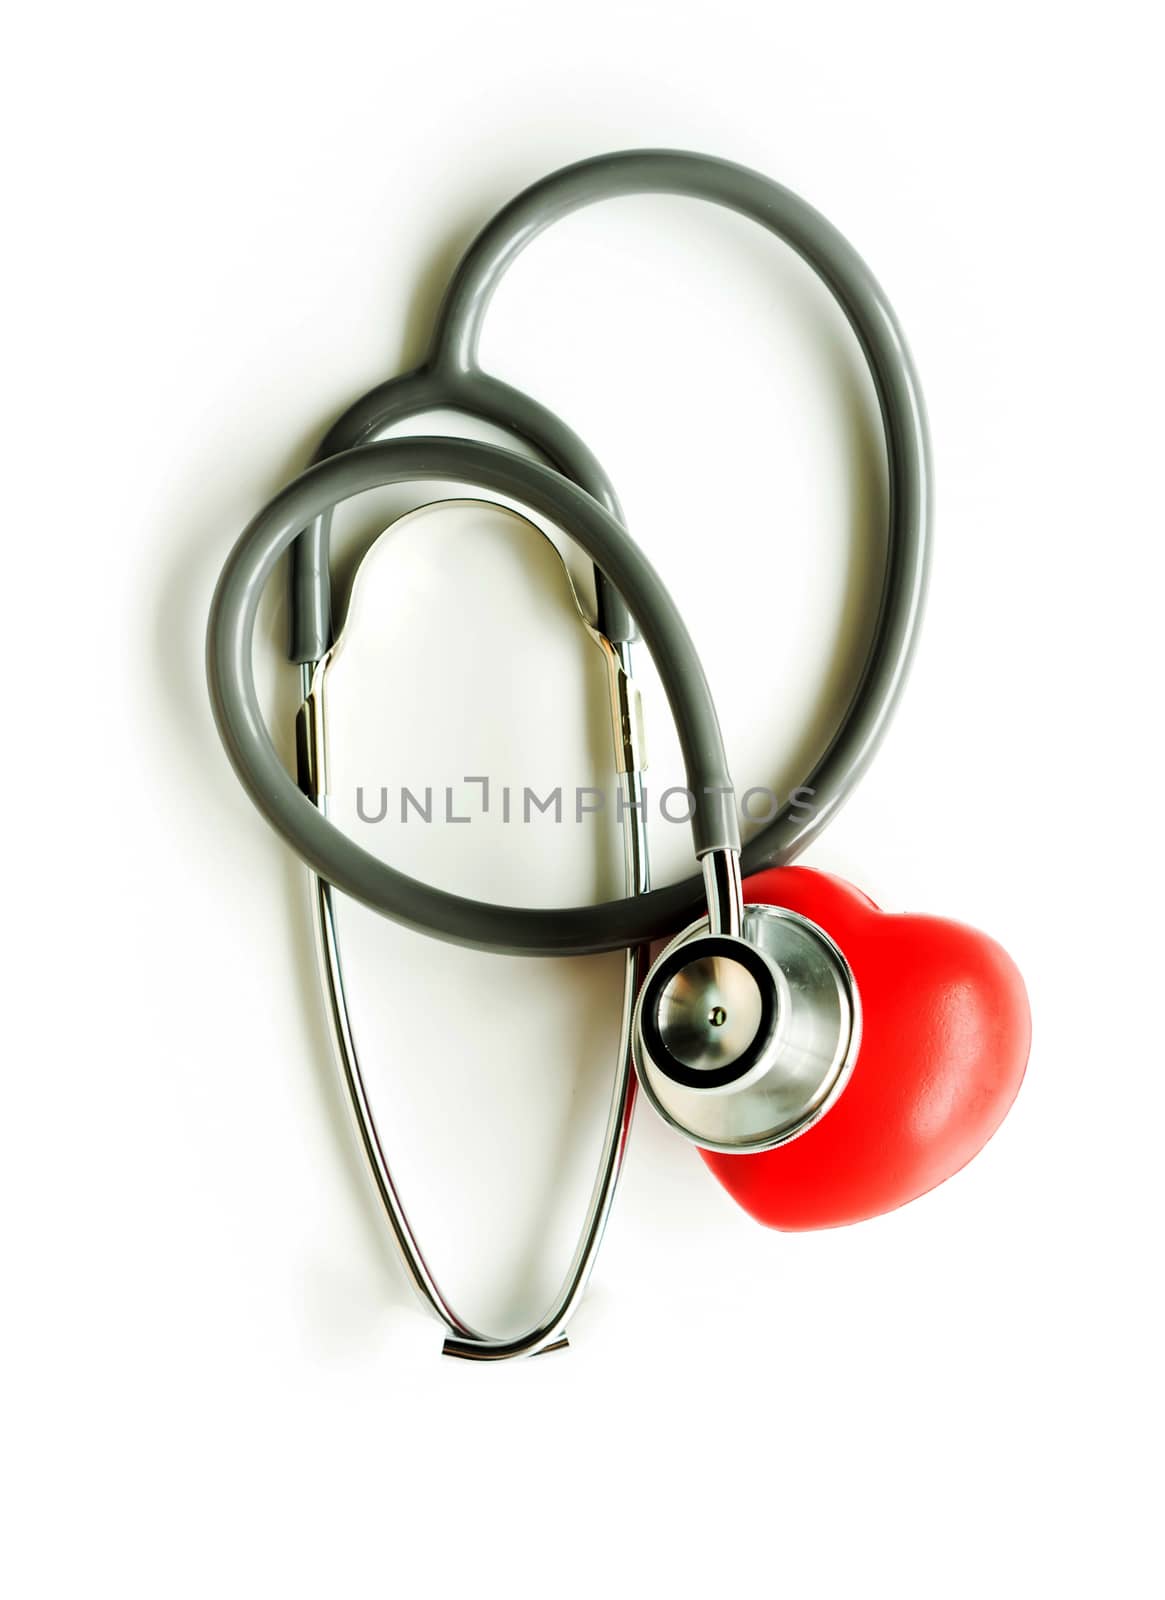 Medical stethoscope and heart isolated on white.